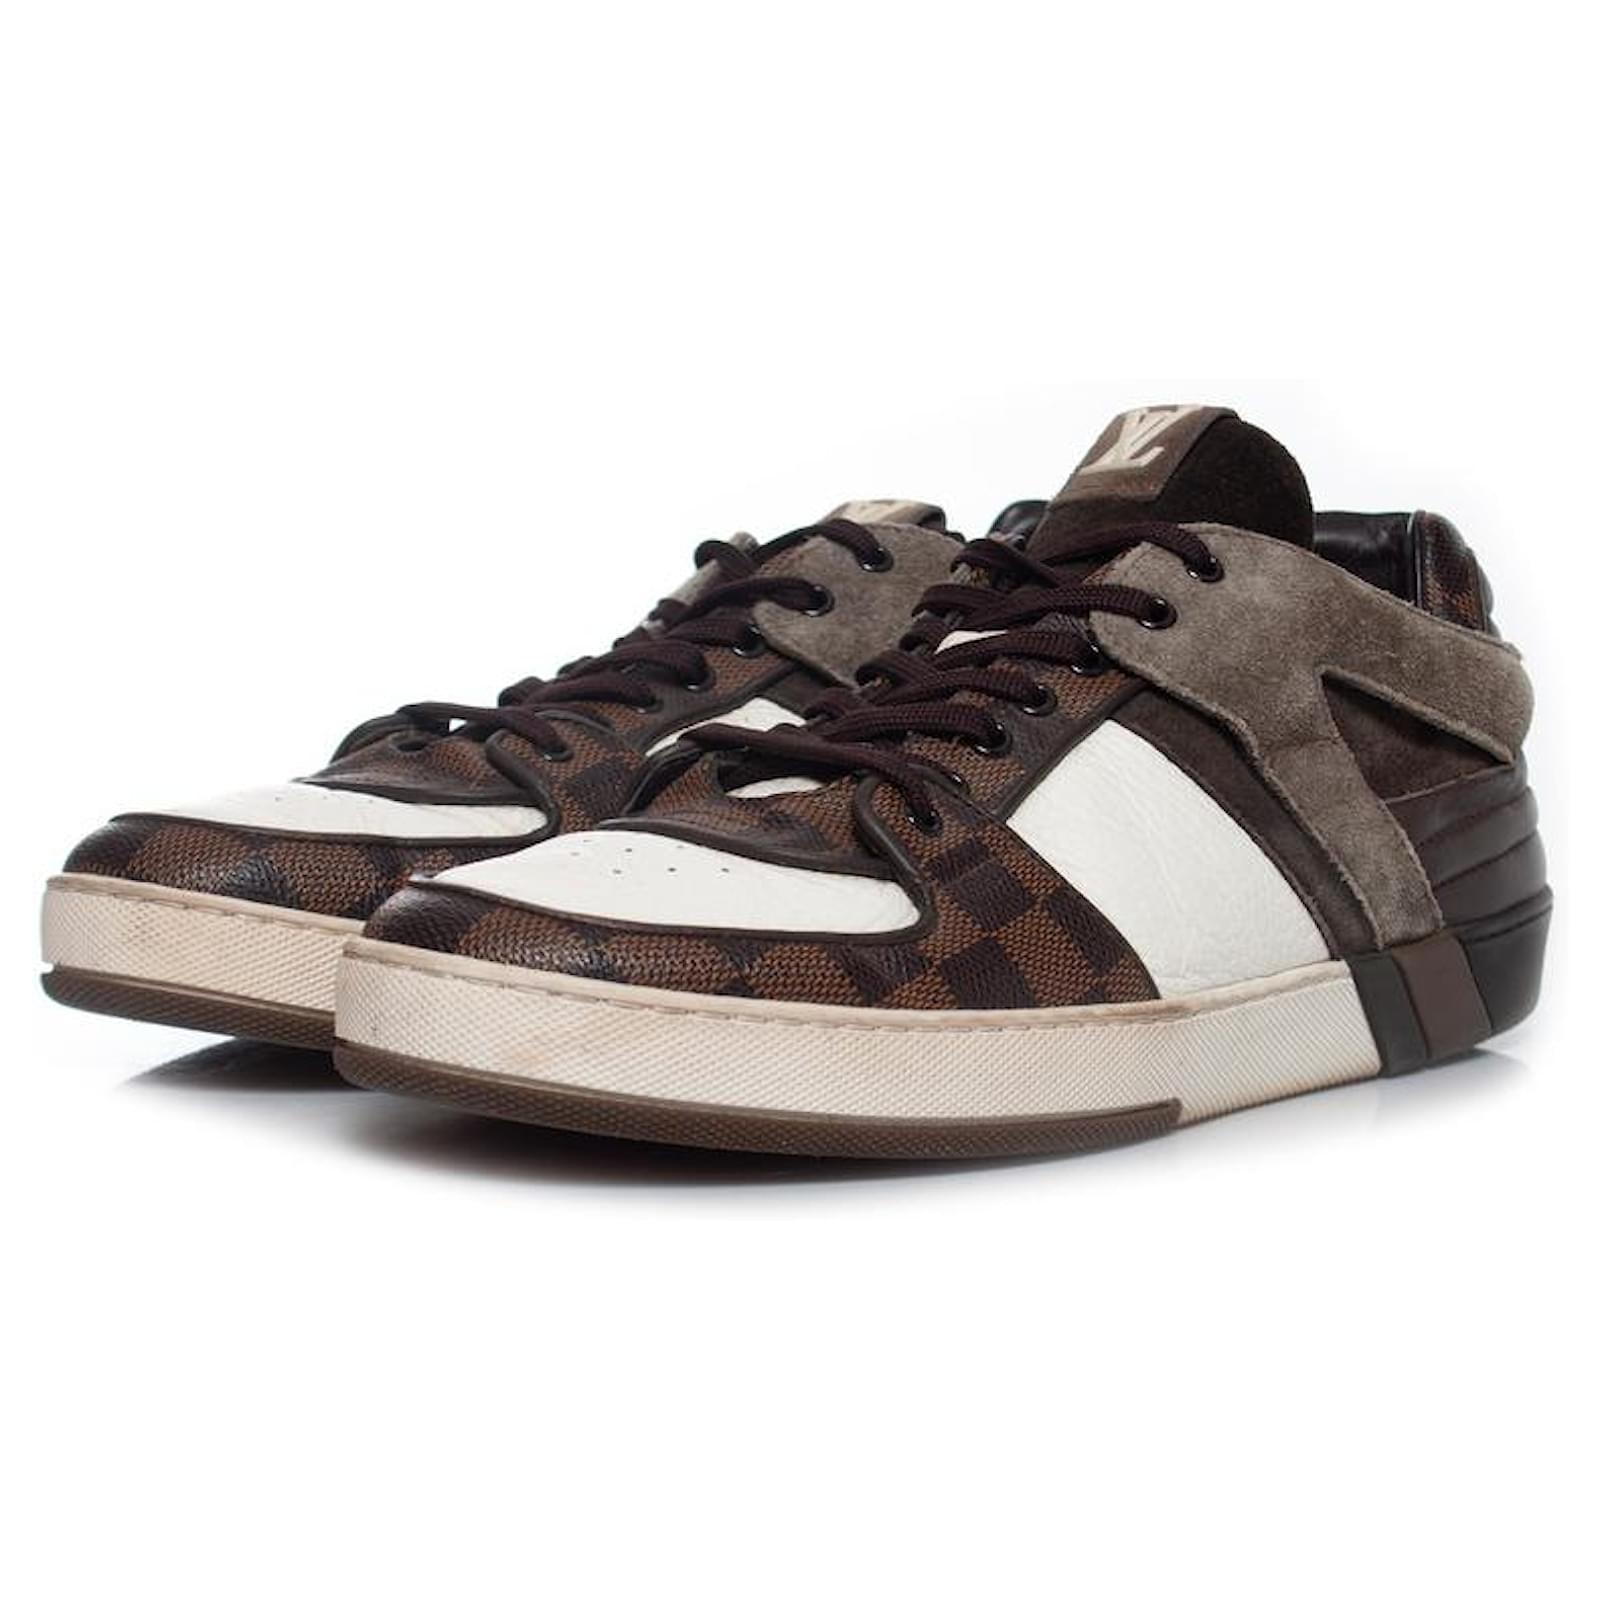 Frontrow leather trainers Louis Vuitton Brown size 38.5 EU in